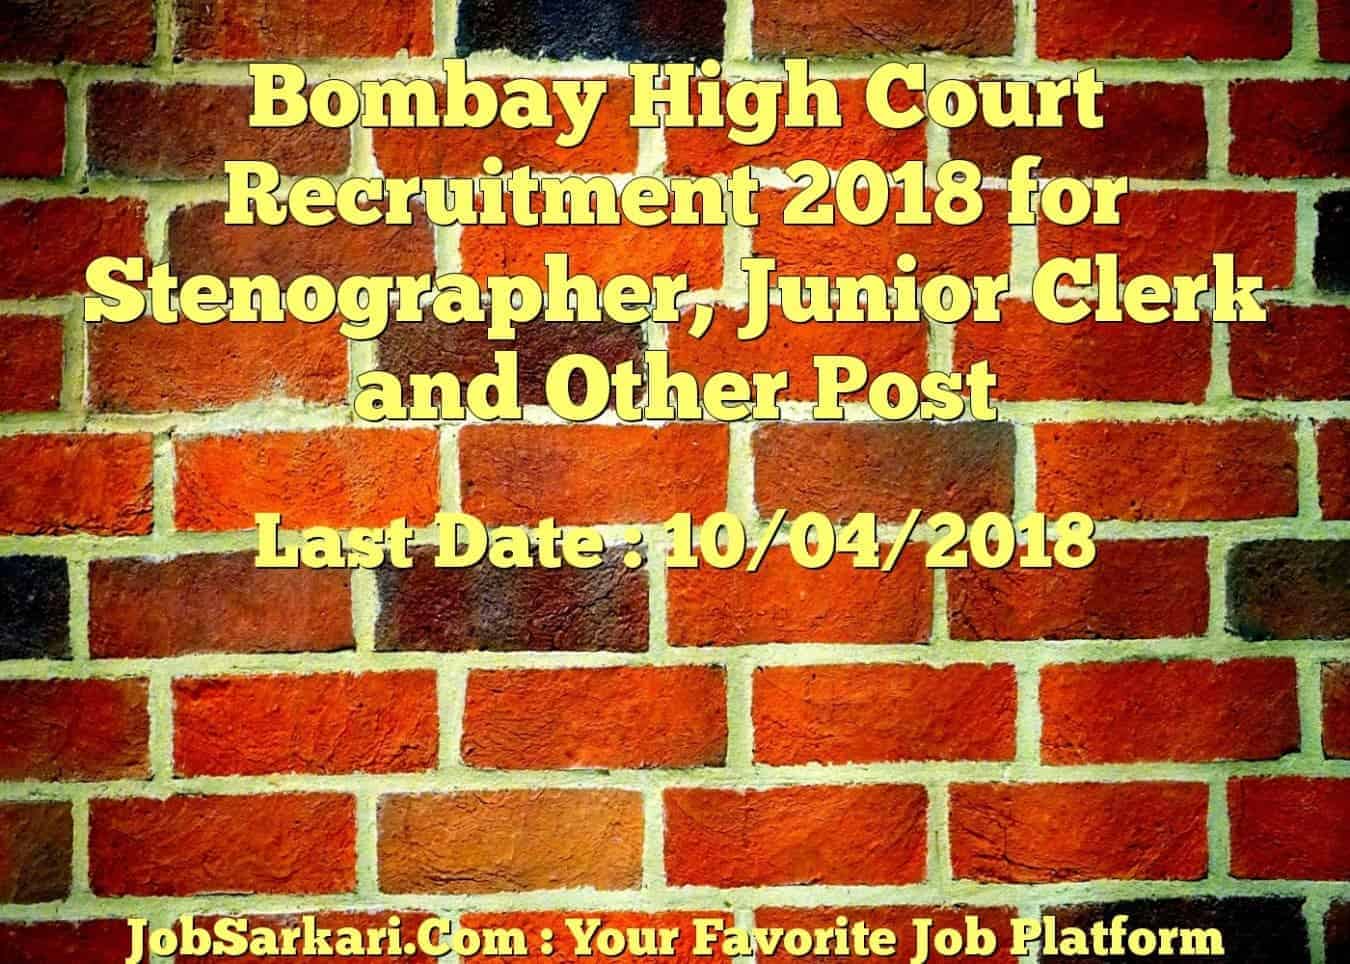 Bombay High Court Recruitment 2018 for Stenographer, Junior Clerk and Other Post